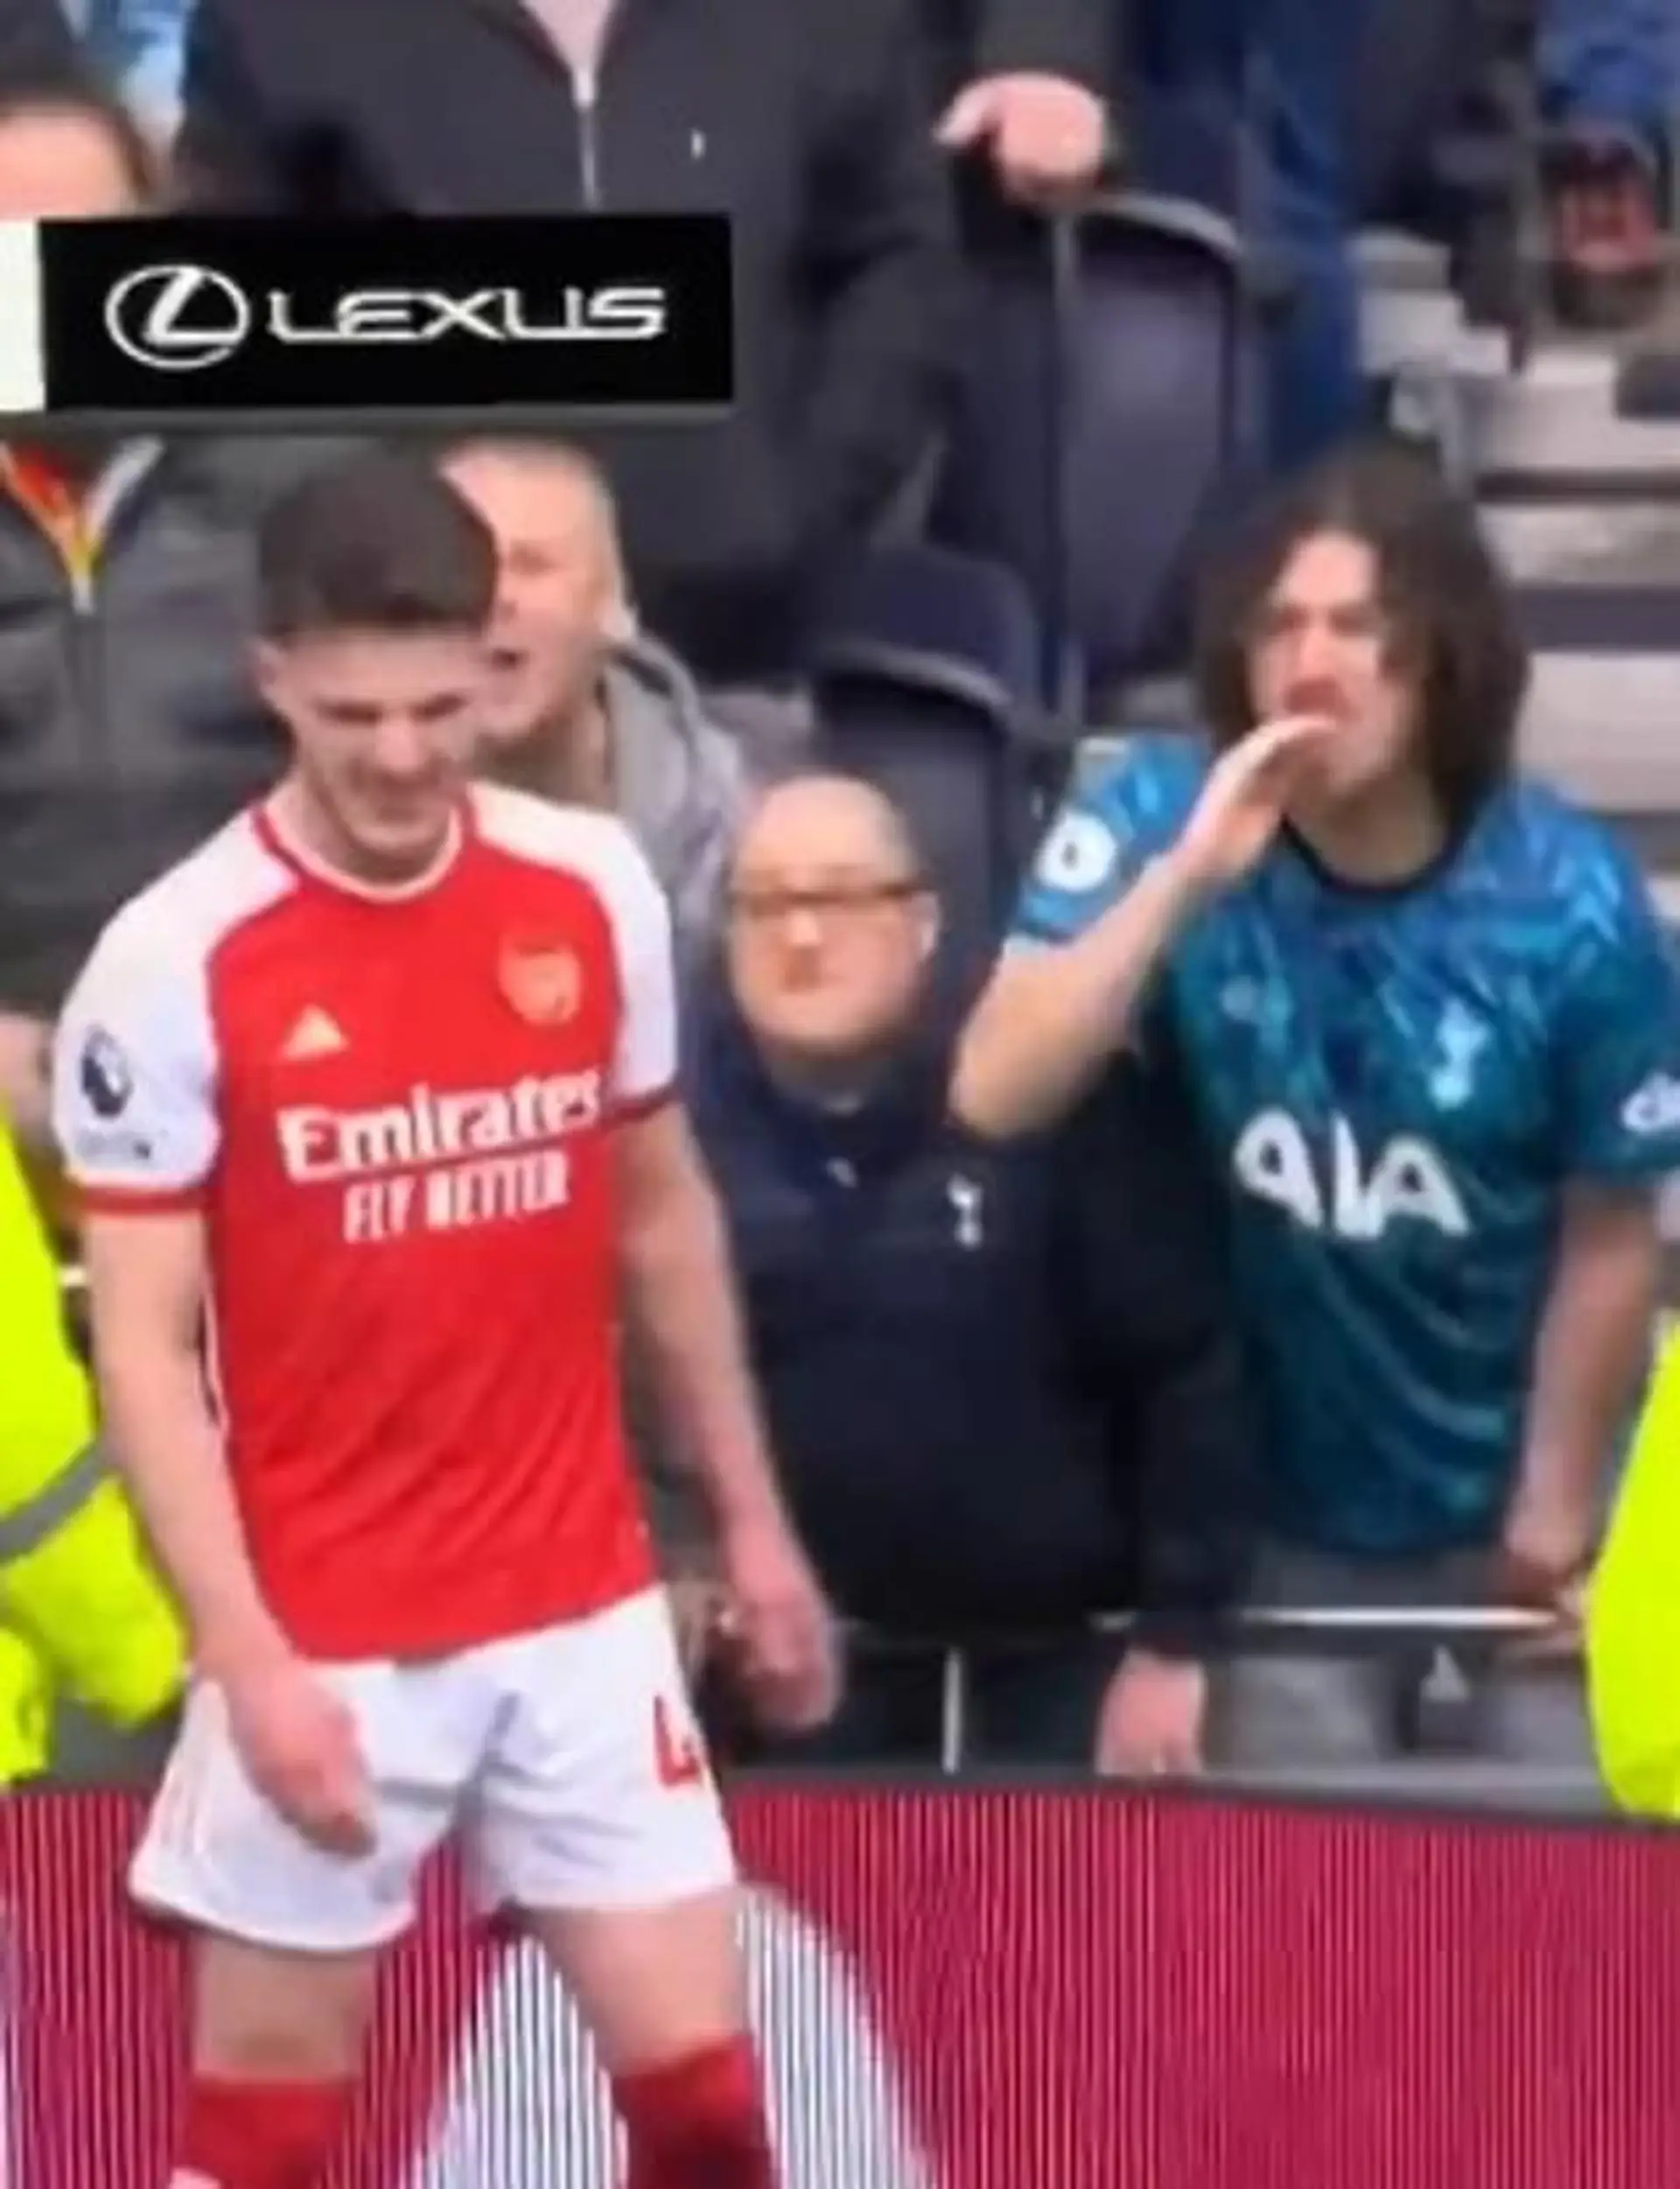 Tottenham fan hurls abuse at Declan Rice but then heads for the exit